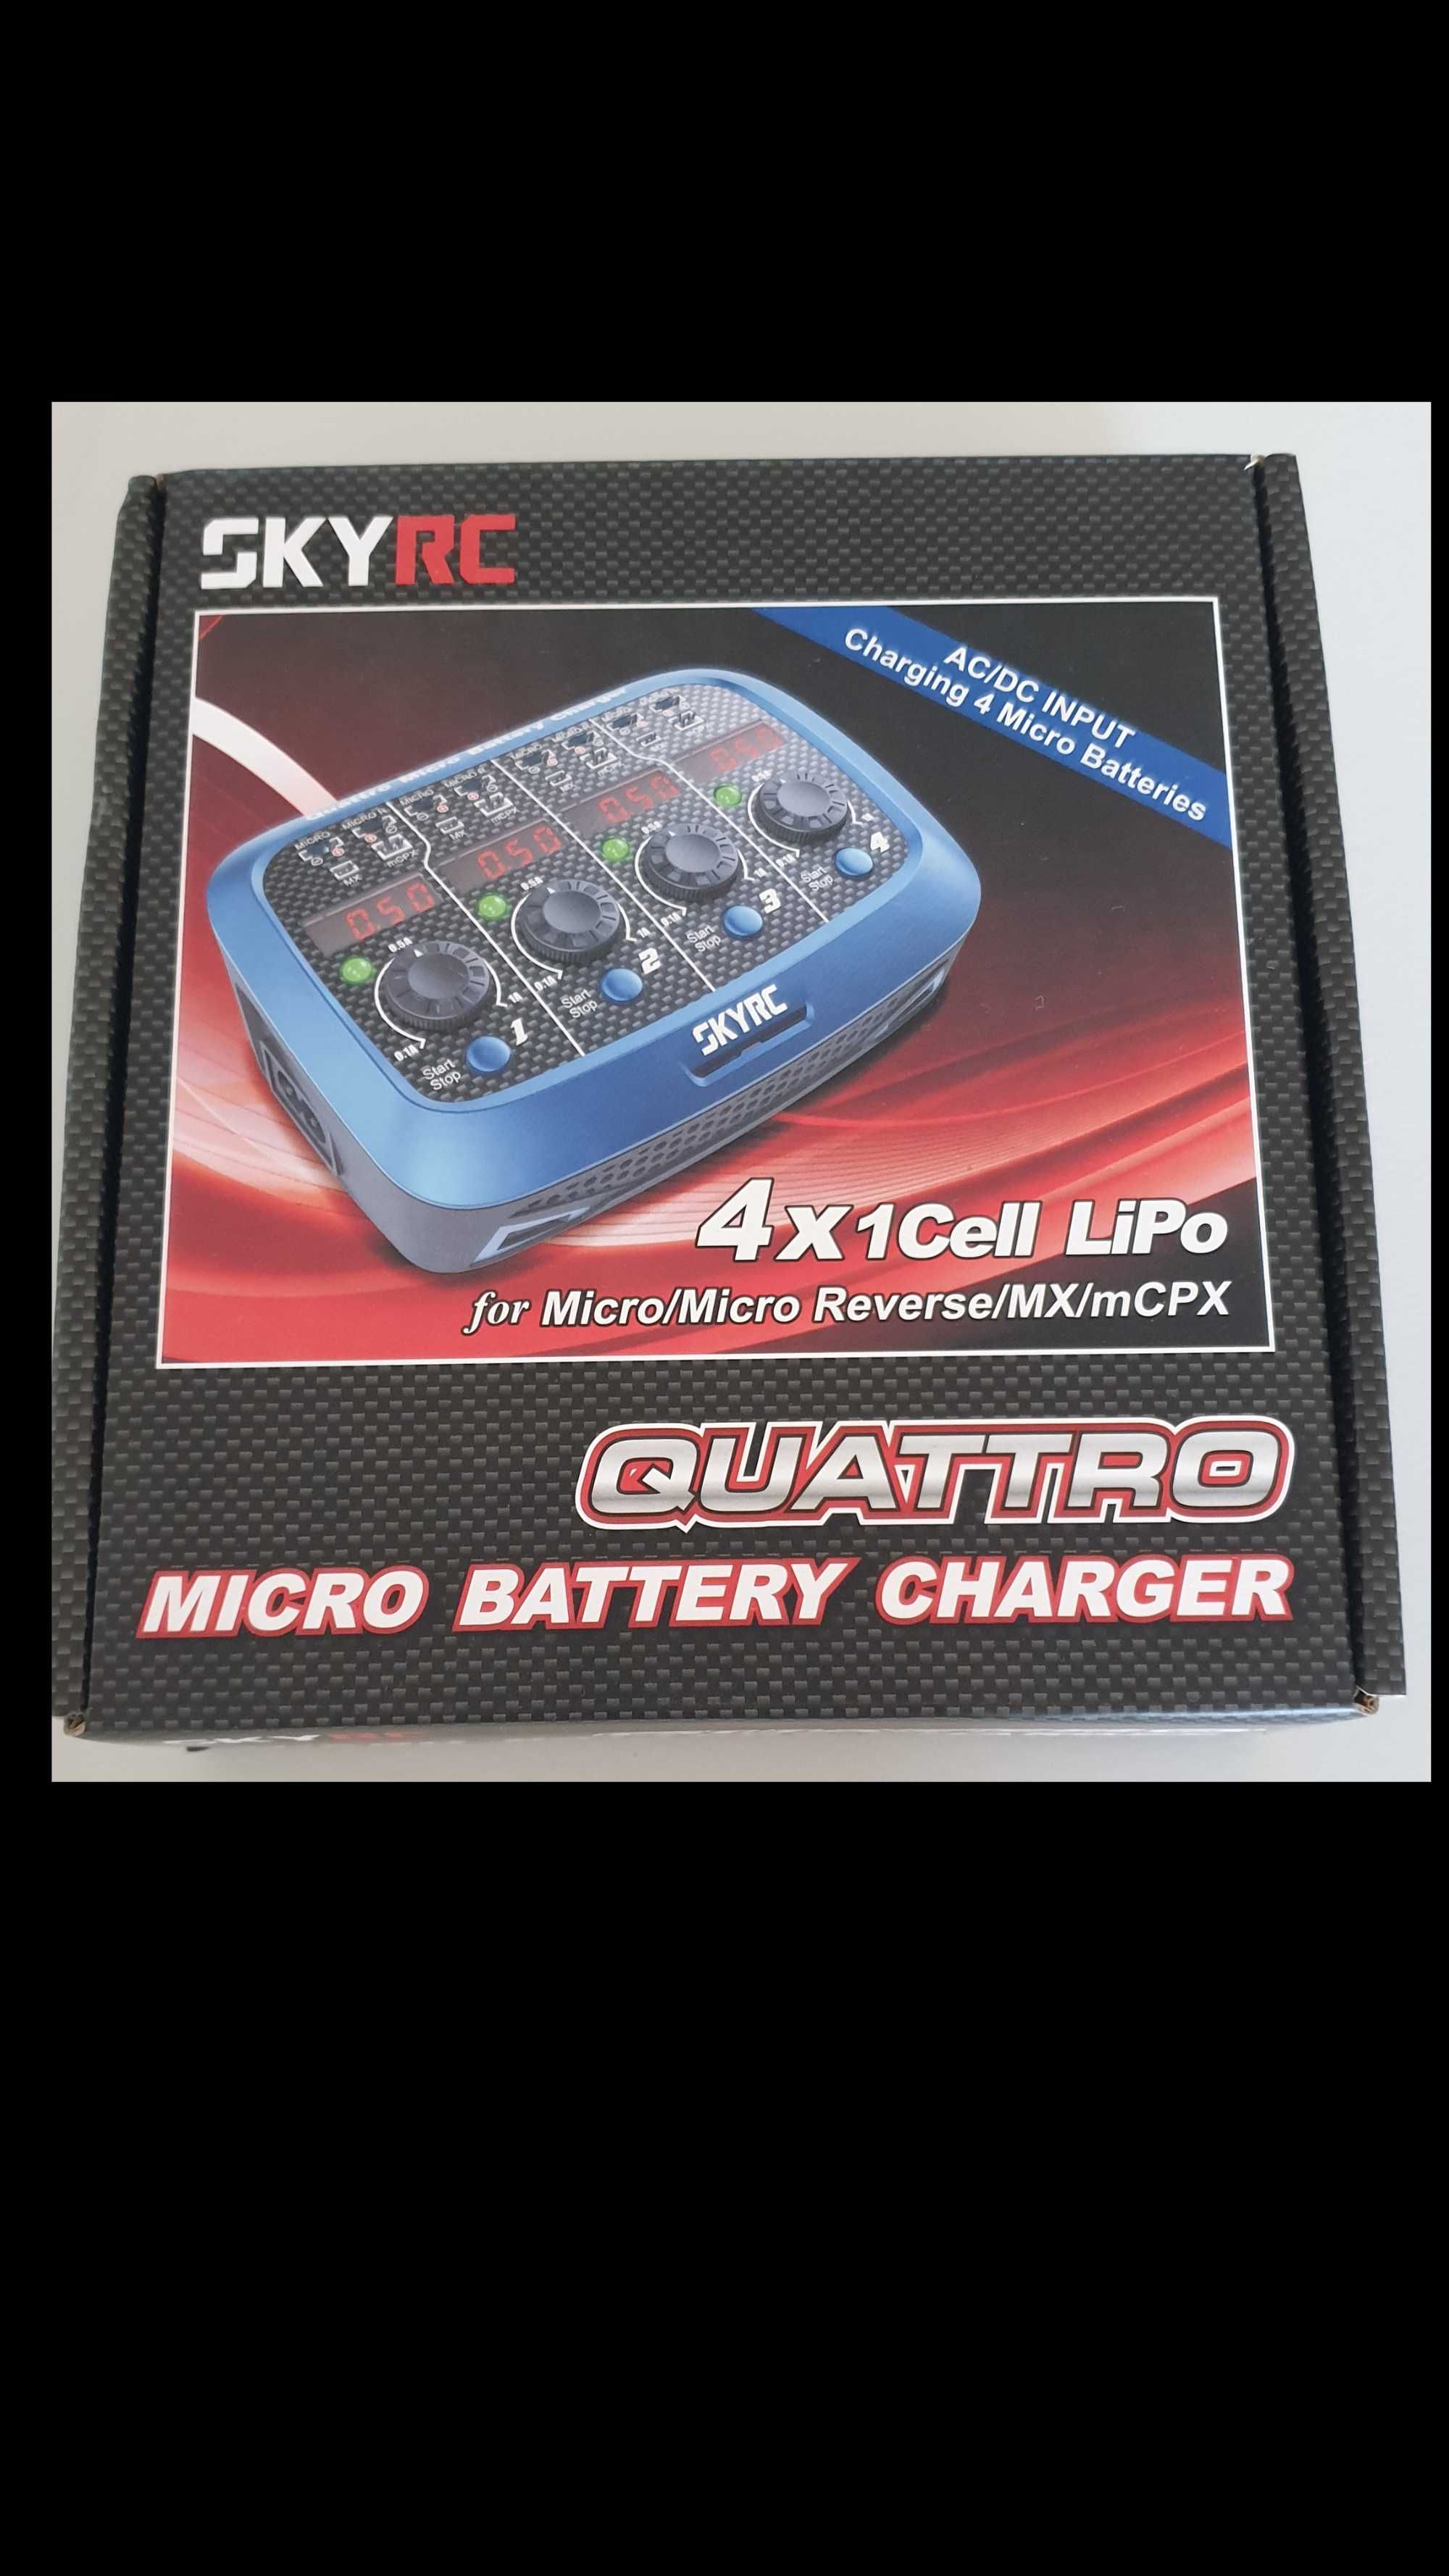 SKYRC Quattro Micro Battery Charger